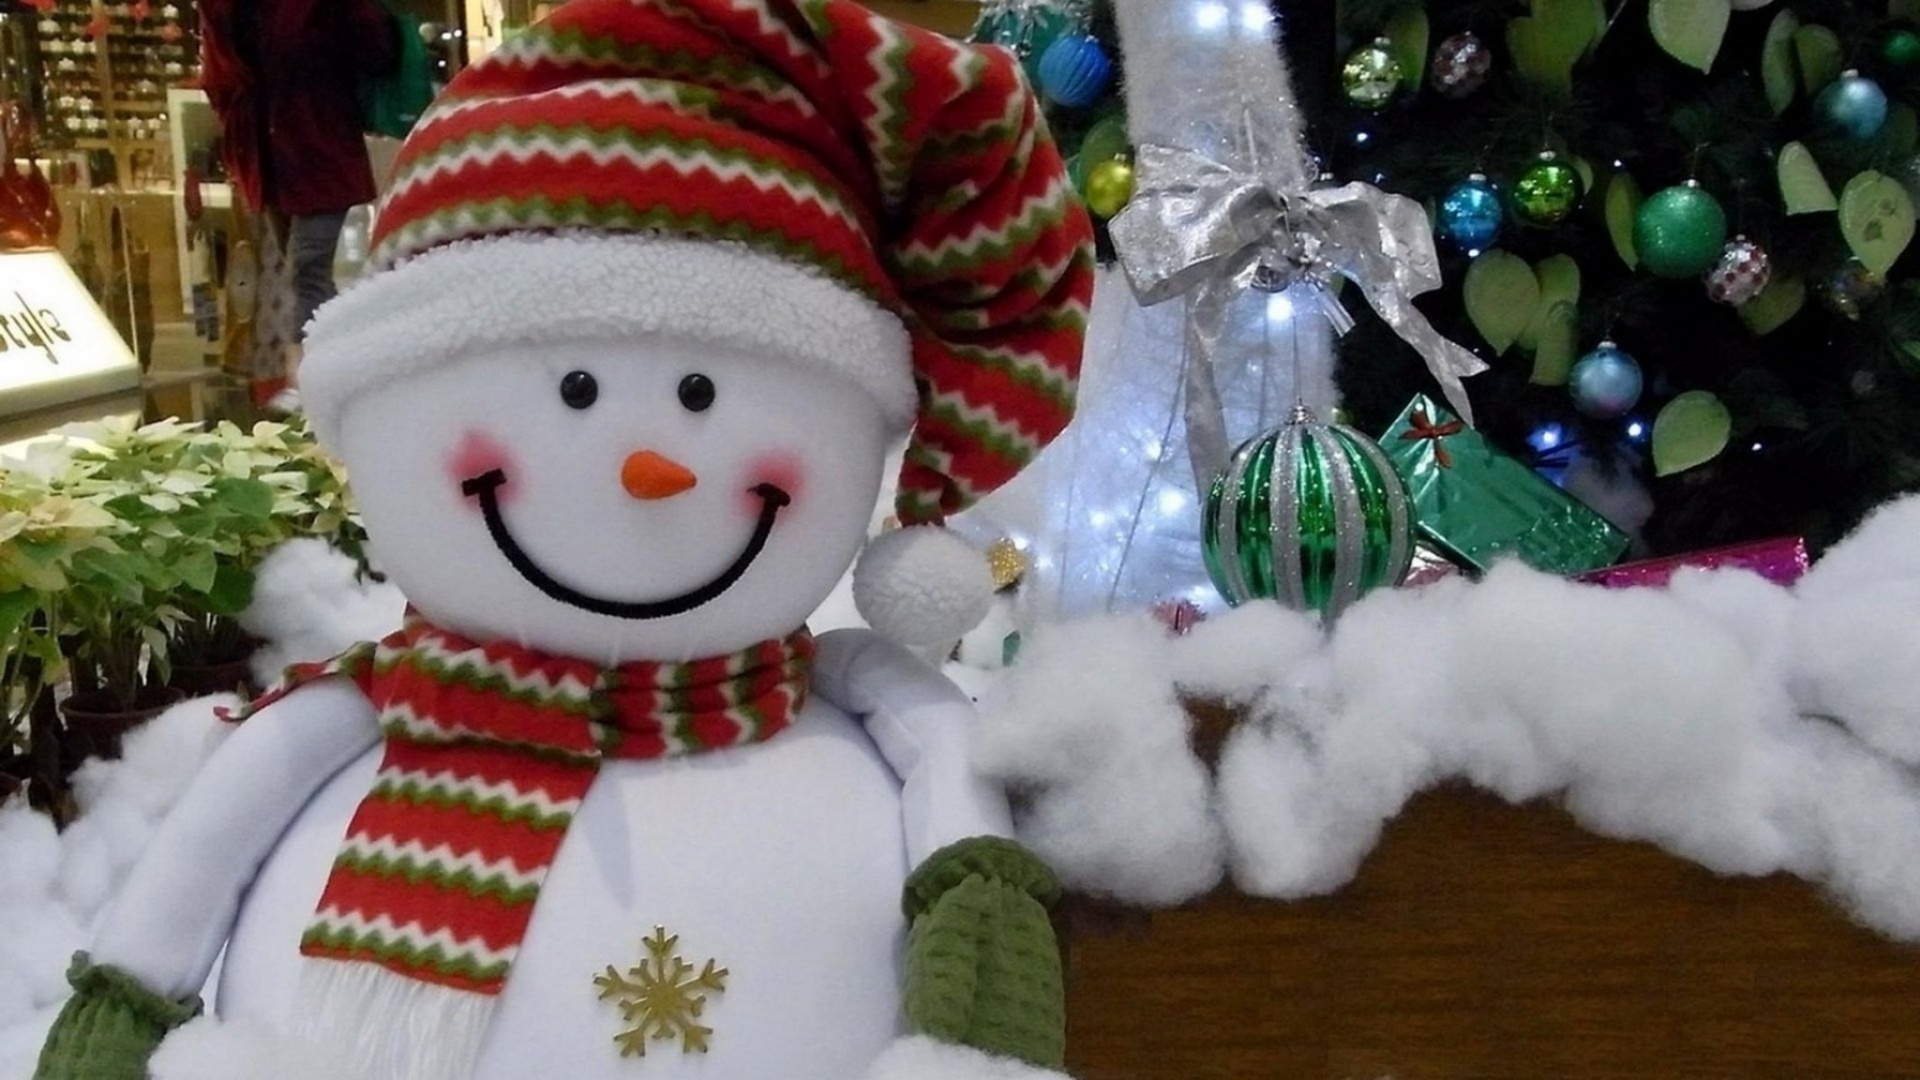 Snowman Smiling Cotton Tree Presents Christmas New Year Holiday